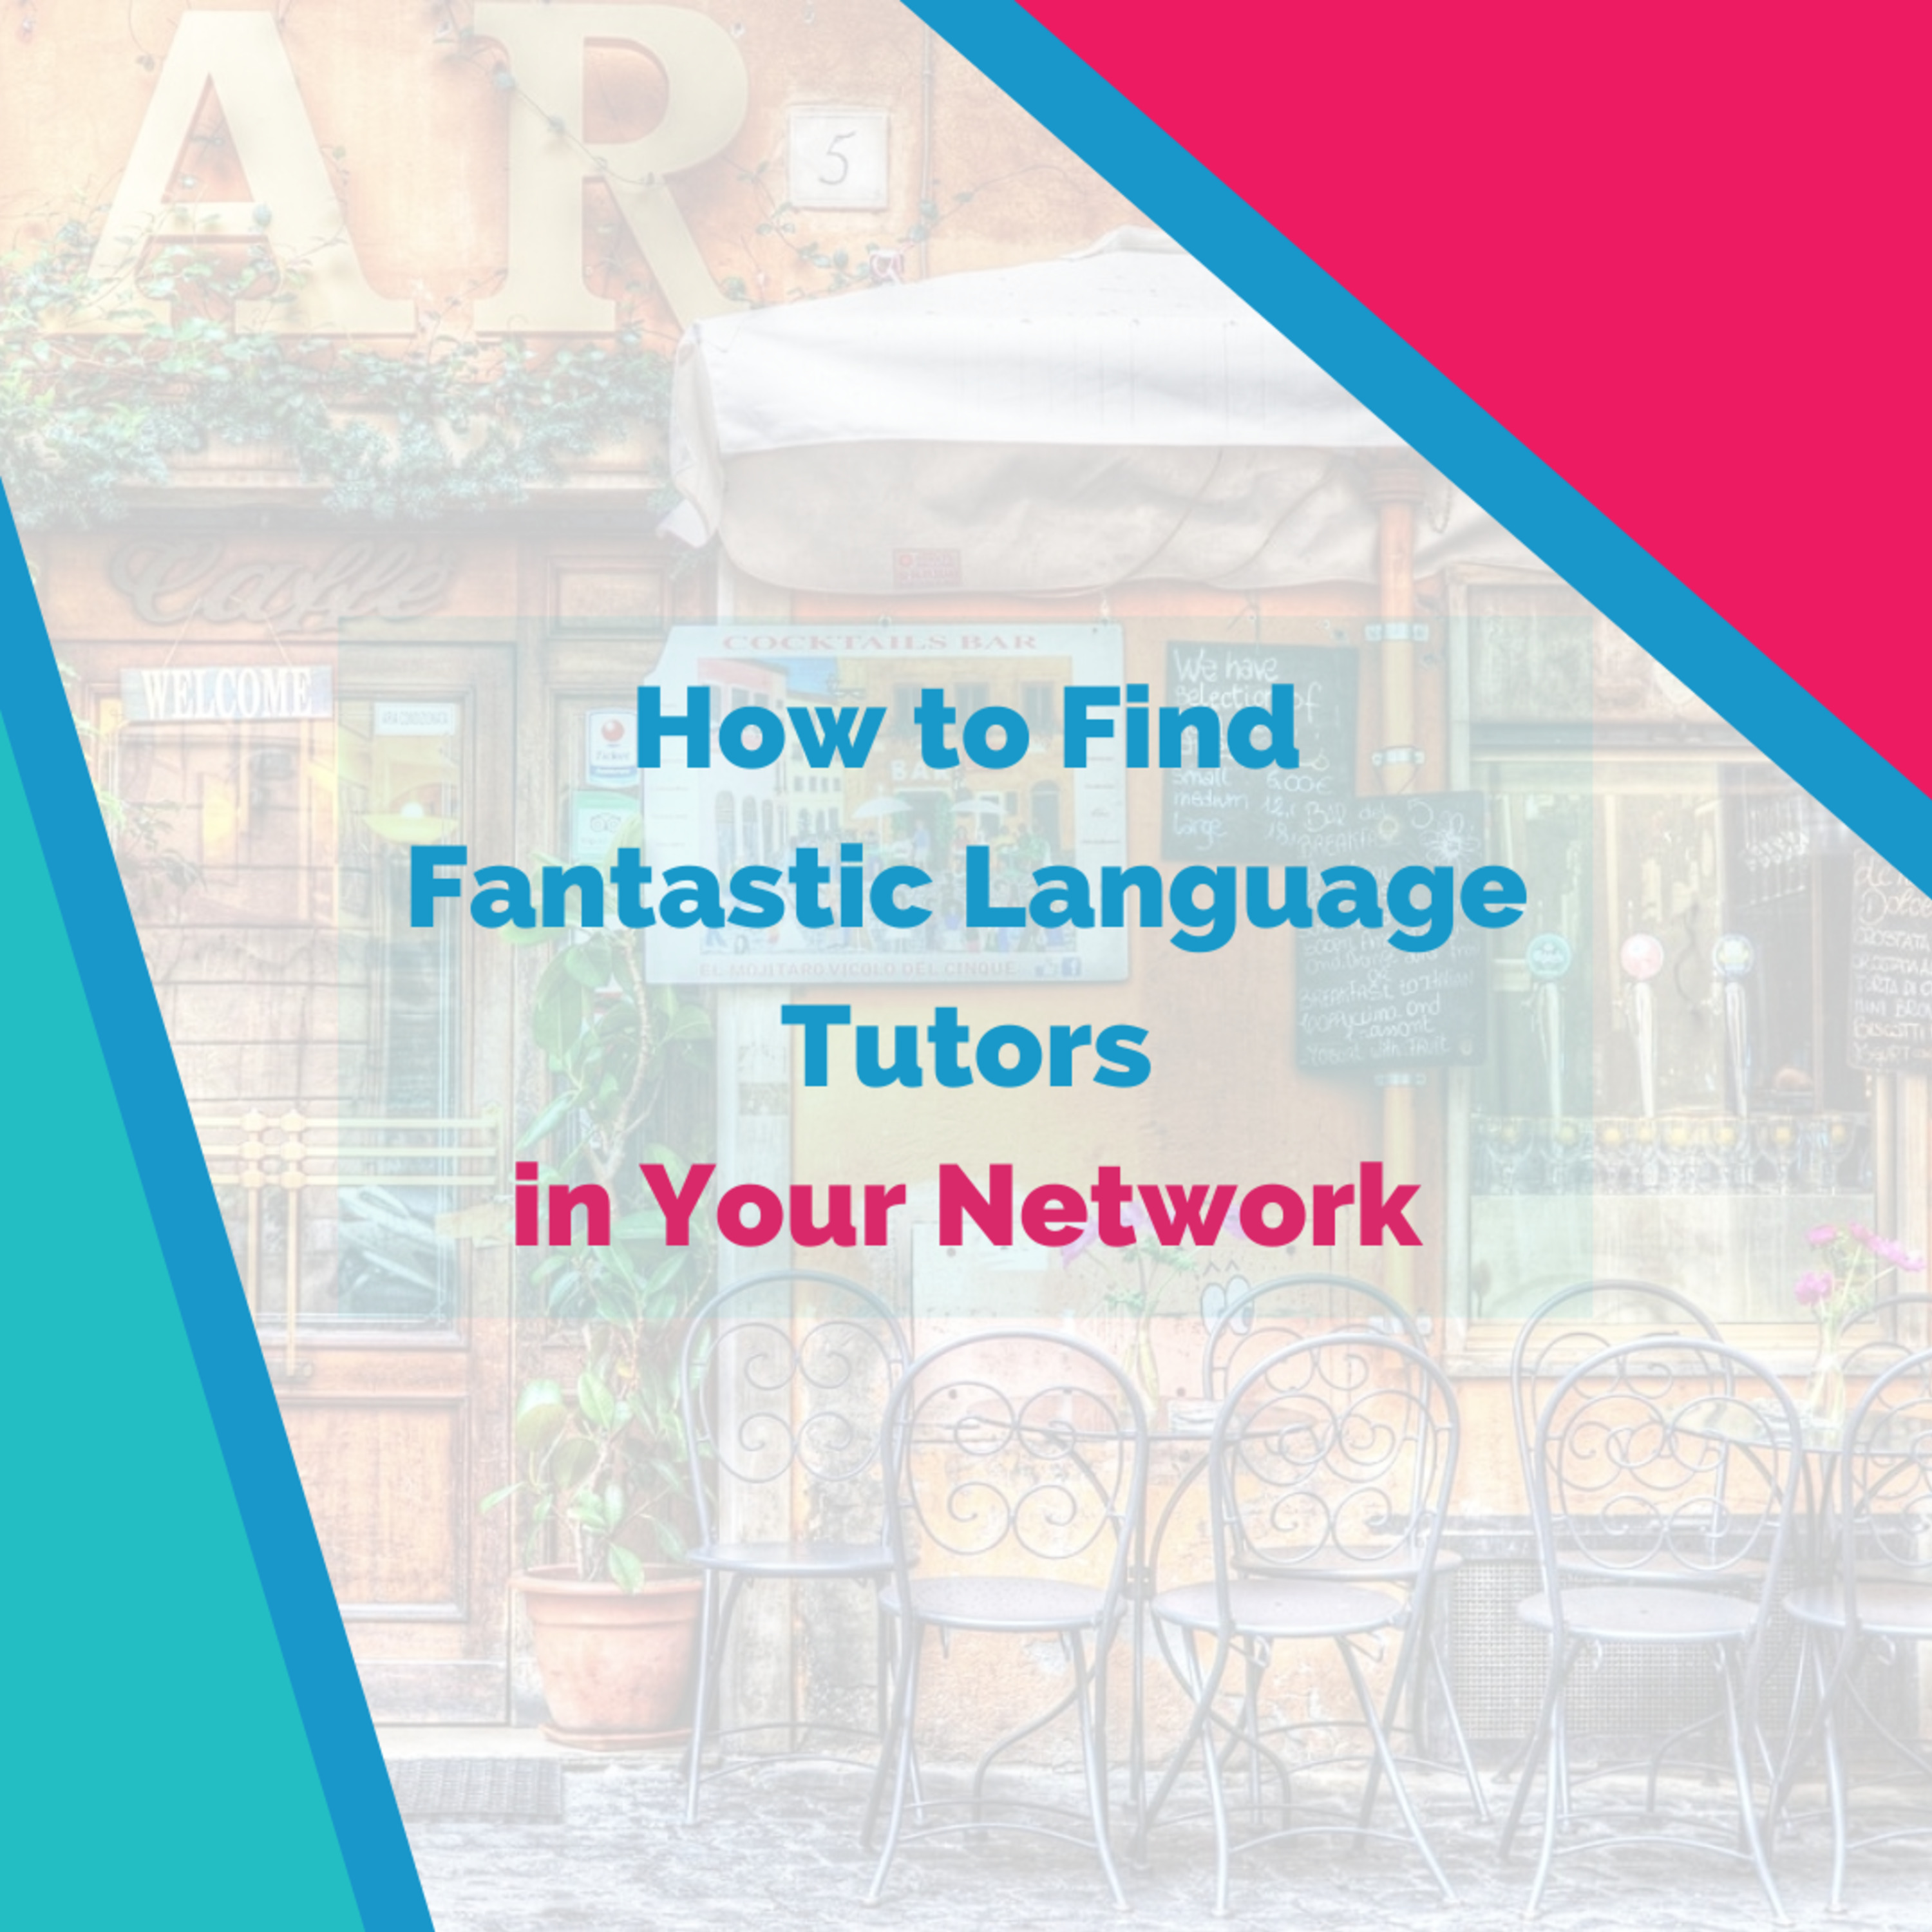 How to Find Fantastic Language Tutors in Your Network Right Now